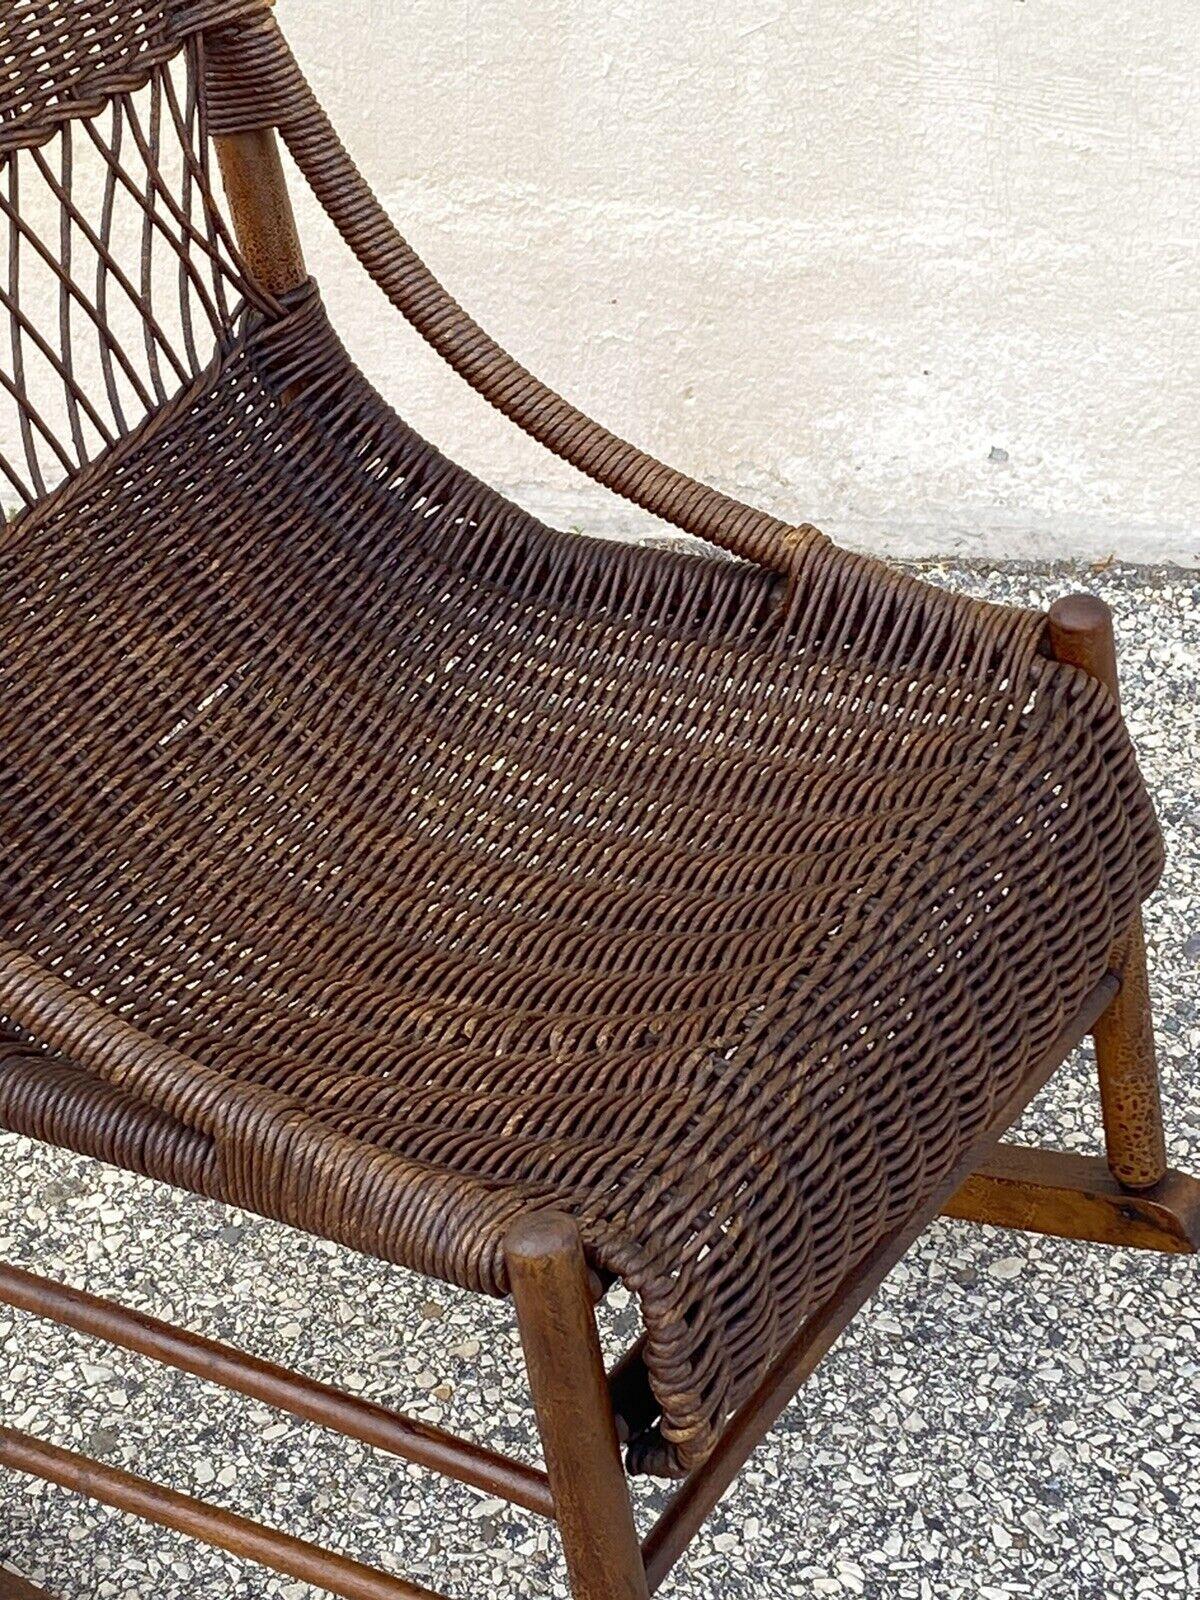 value of old wicker rocking chair